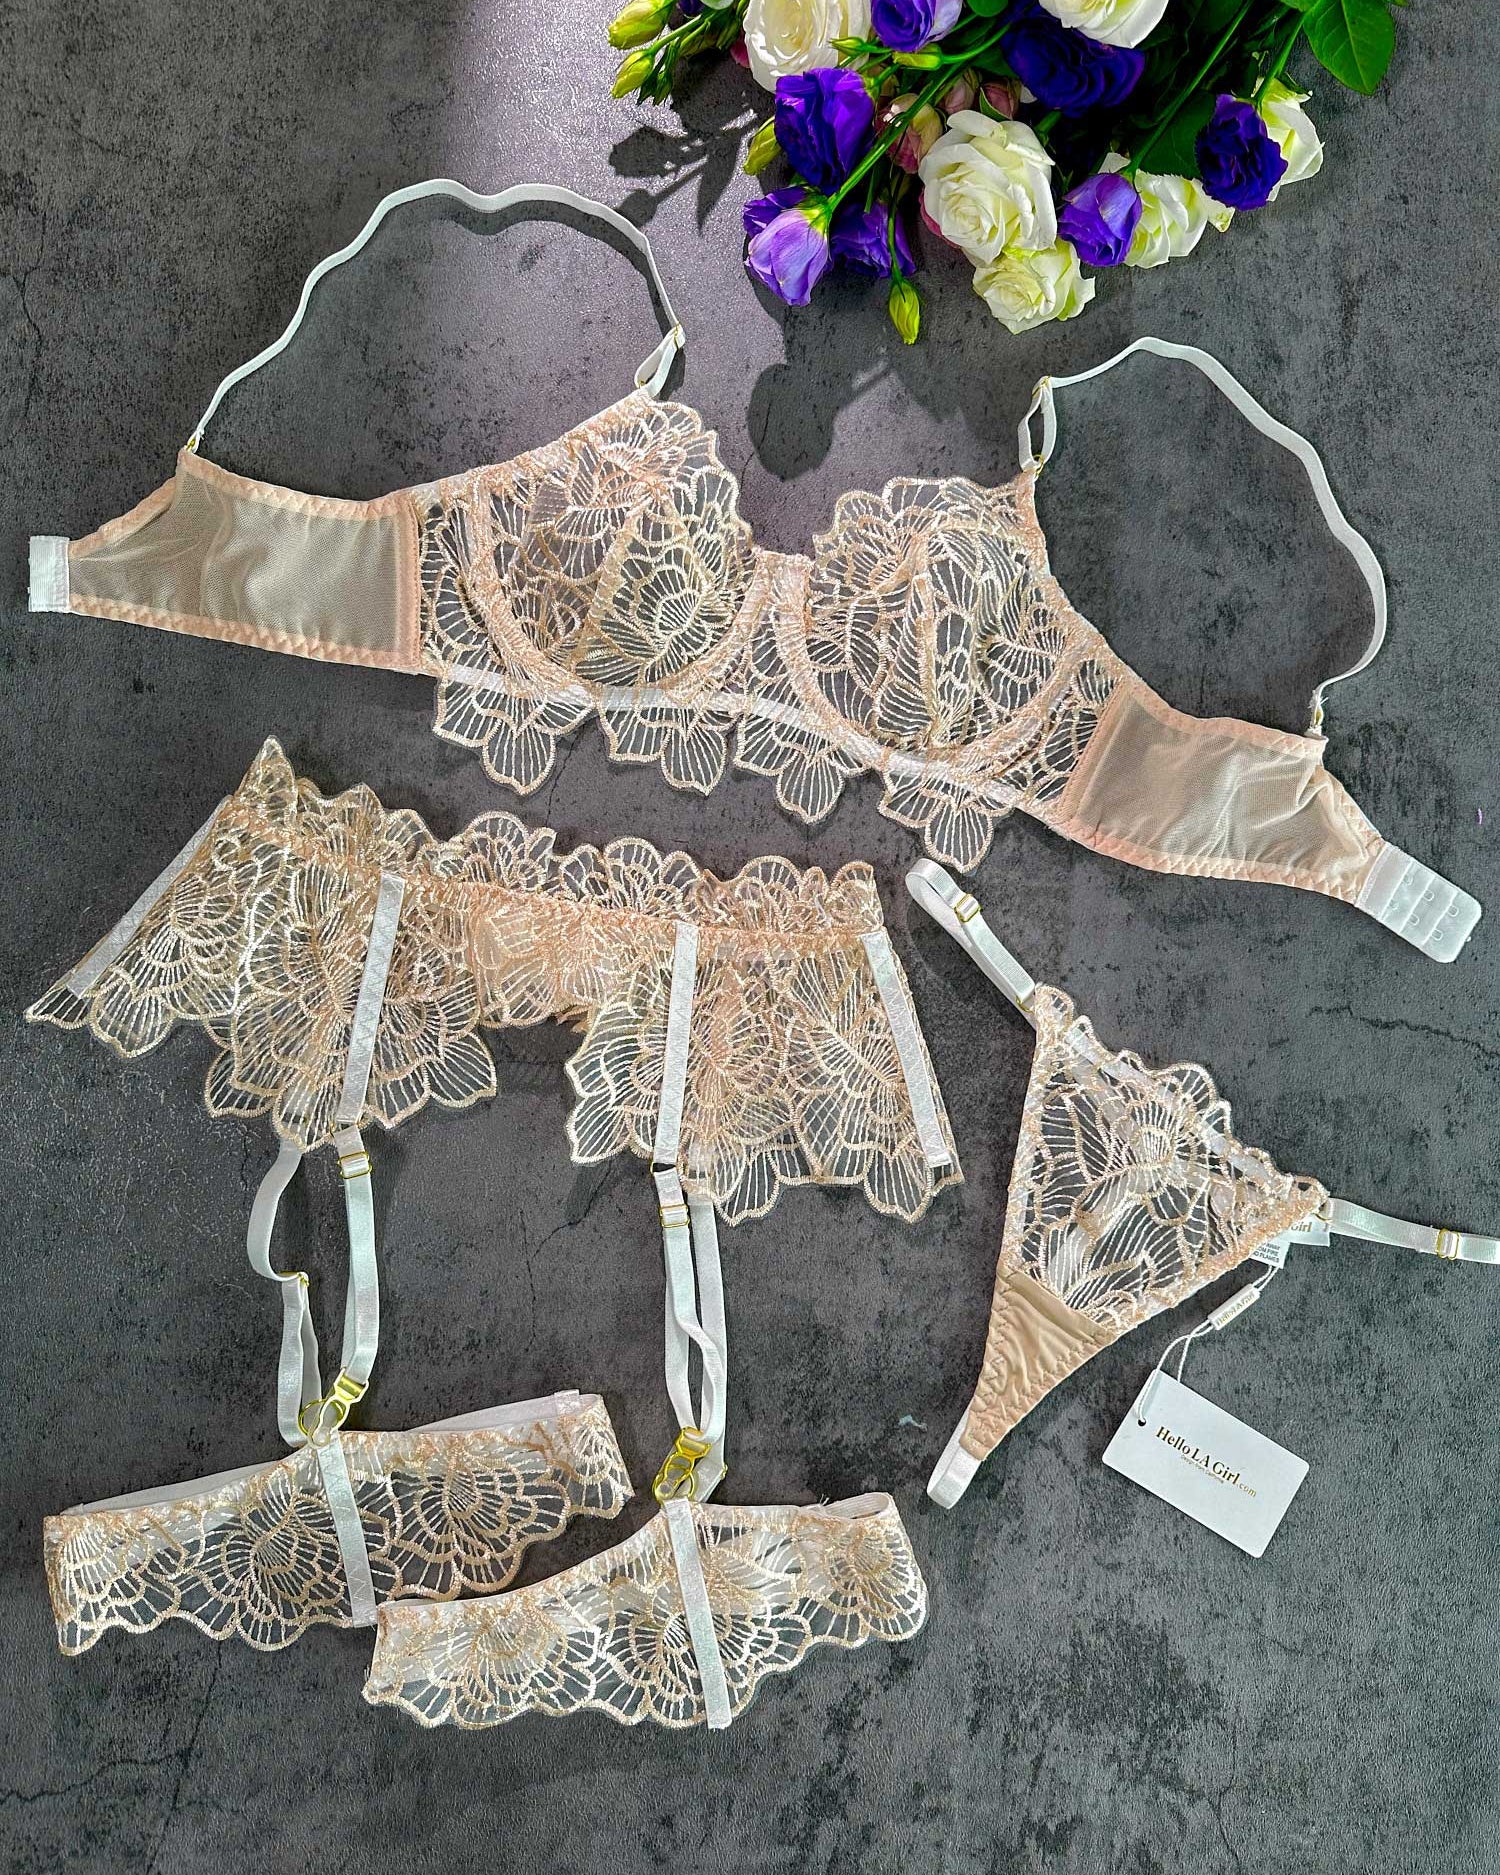 Apricot Lace Flower Embroidery  Lingerie Set| HelloLAGirl